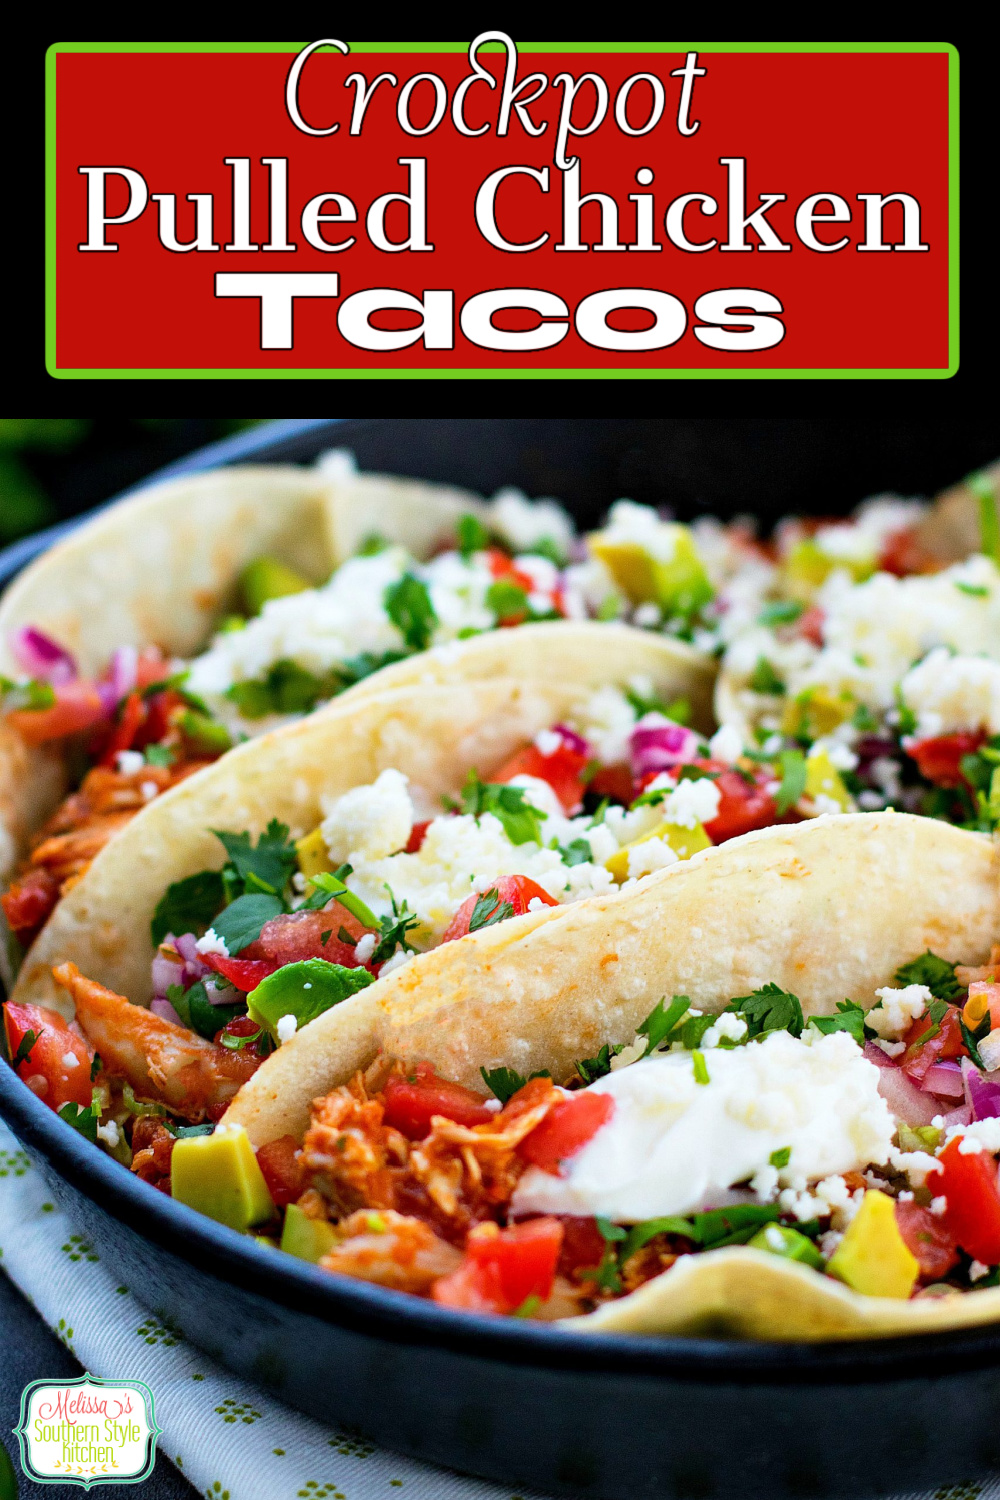 Simmered in a slow cooker these Crockpot Pulled Chicken Tacos will create a homestyle fiesta any night of the week #chickentacos #crockpotchicken #tacos #easychickenbreastrecipes #chicken #slowcookerchicken #crockpotrecipes #TacoTuesday #dinnerideas #dinner #southernfood #southernrecipes #mexicanfood via @melissasssk